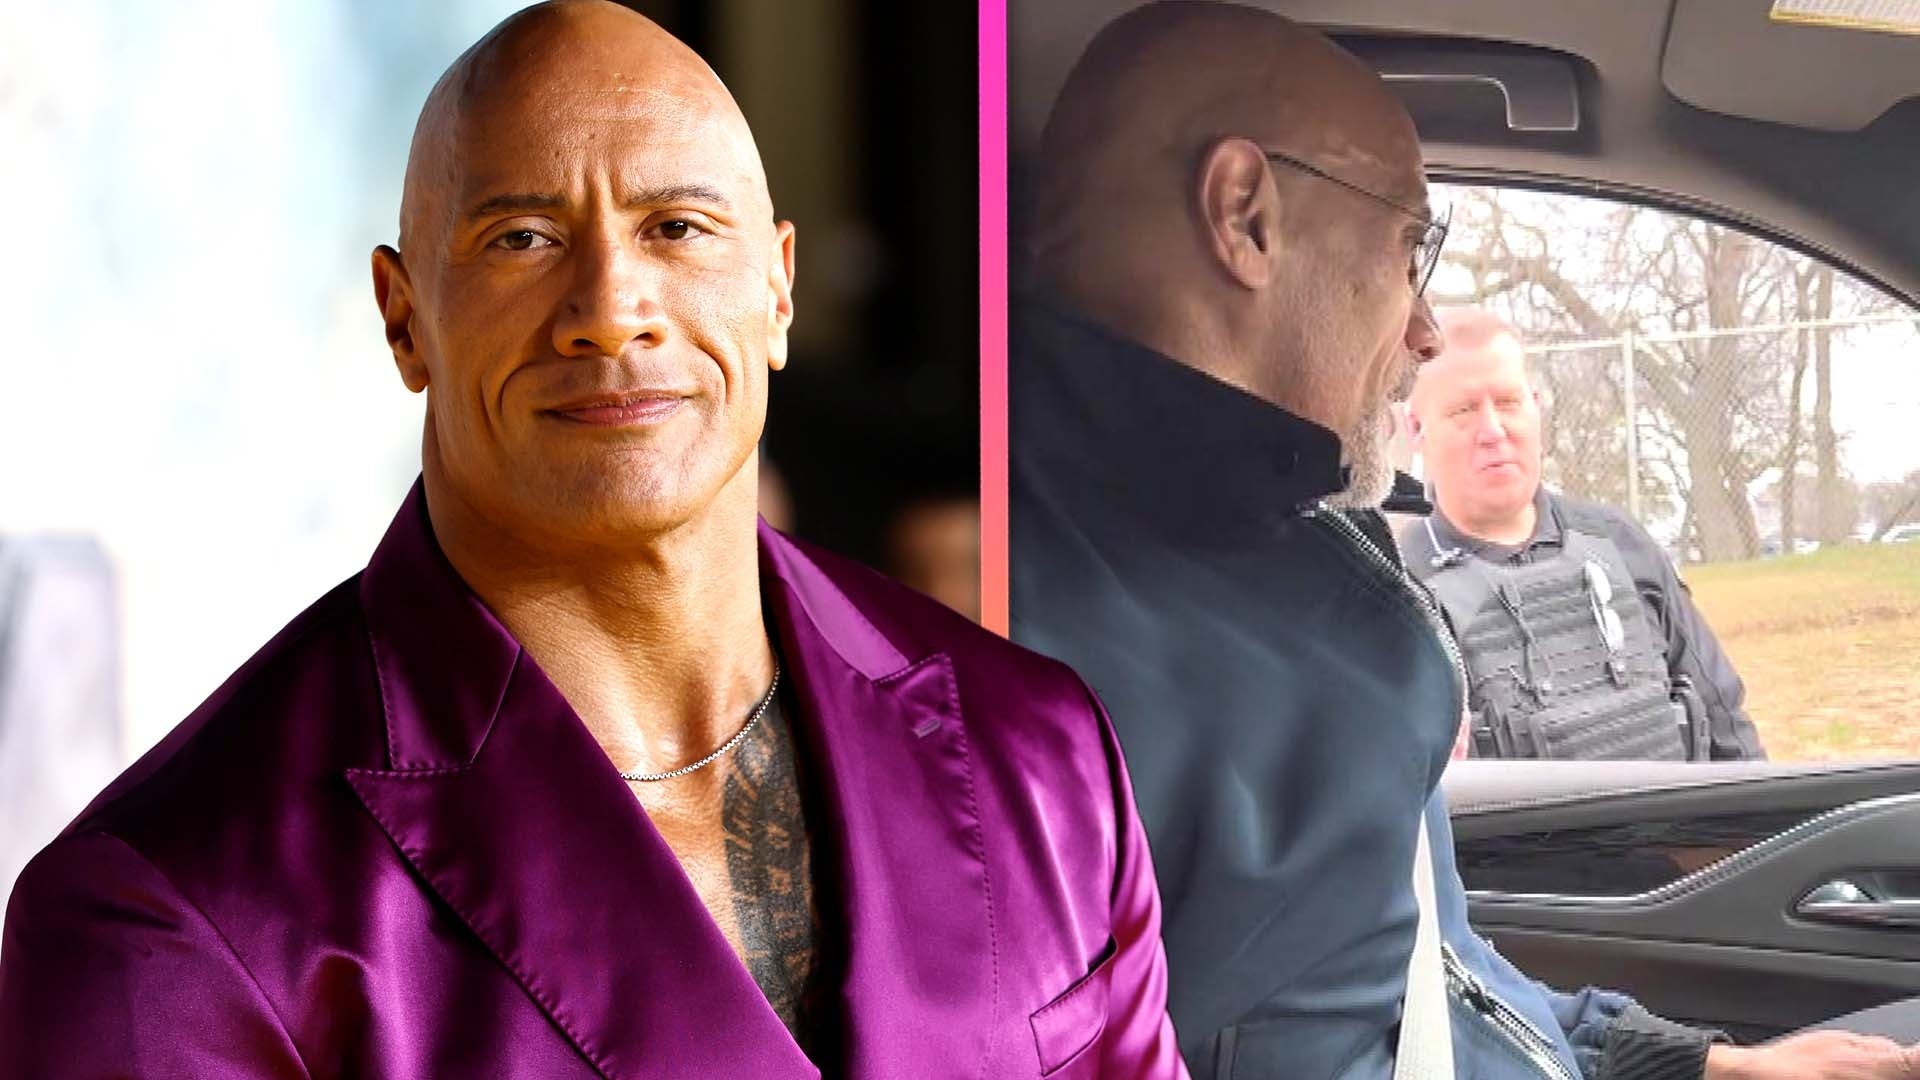 Dwayne Johnson Teases Police About Having 'Guns' After Getting Pulled Over